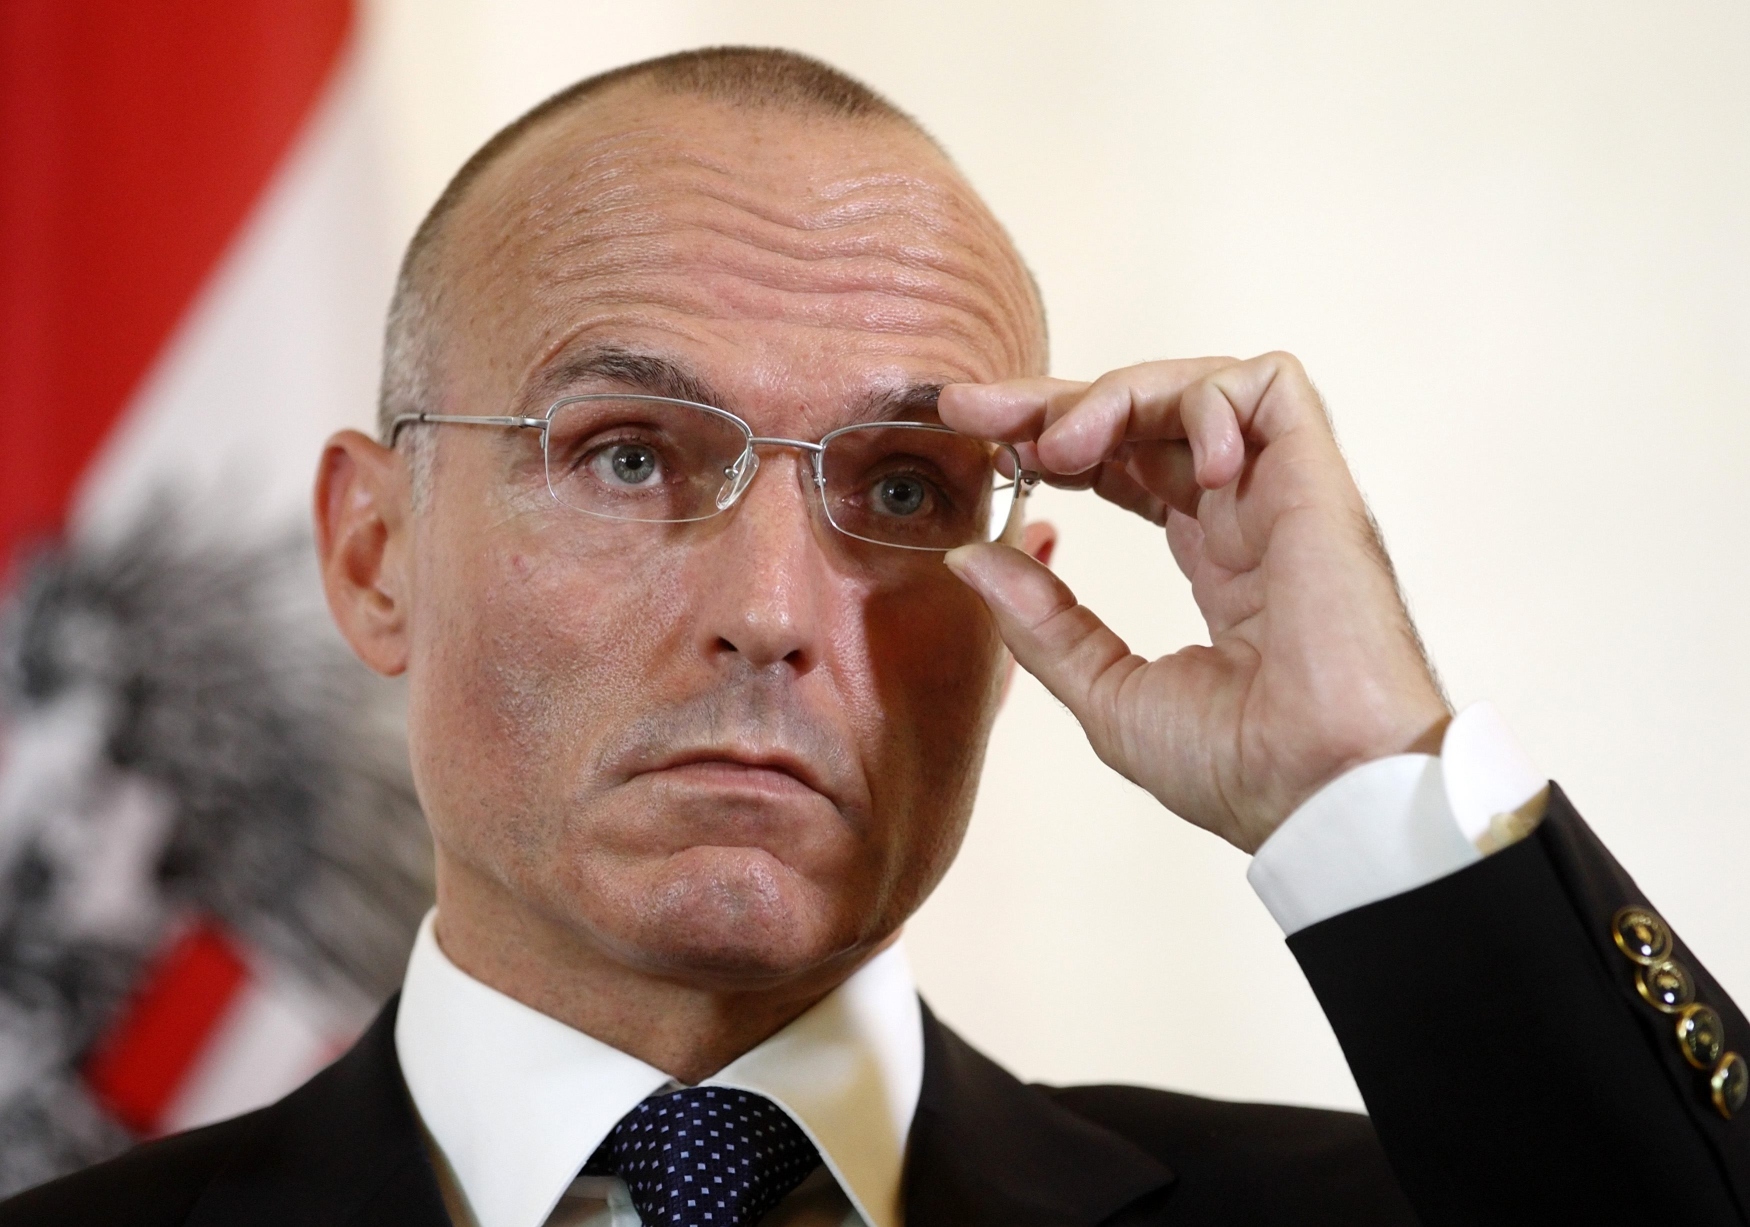 Austria's Defence Minister Gerald Klug during a news conference in Vienna. Austria will withdraw its peacekeepers from the U.N. monitoring force on the Golan Heights. Photo: Reuters